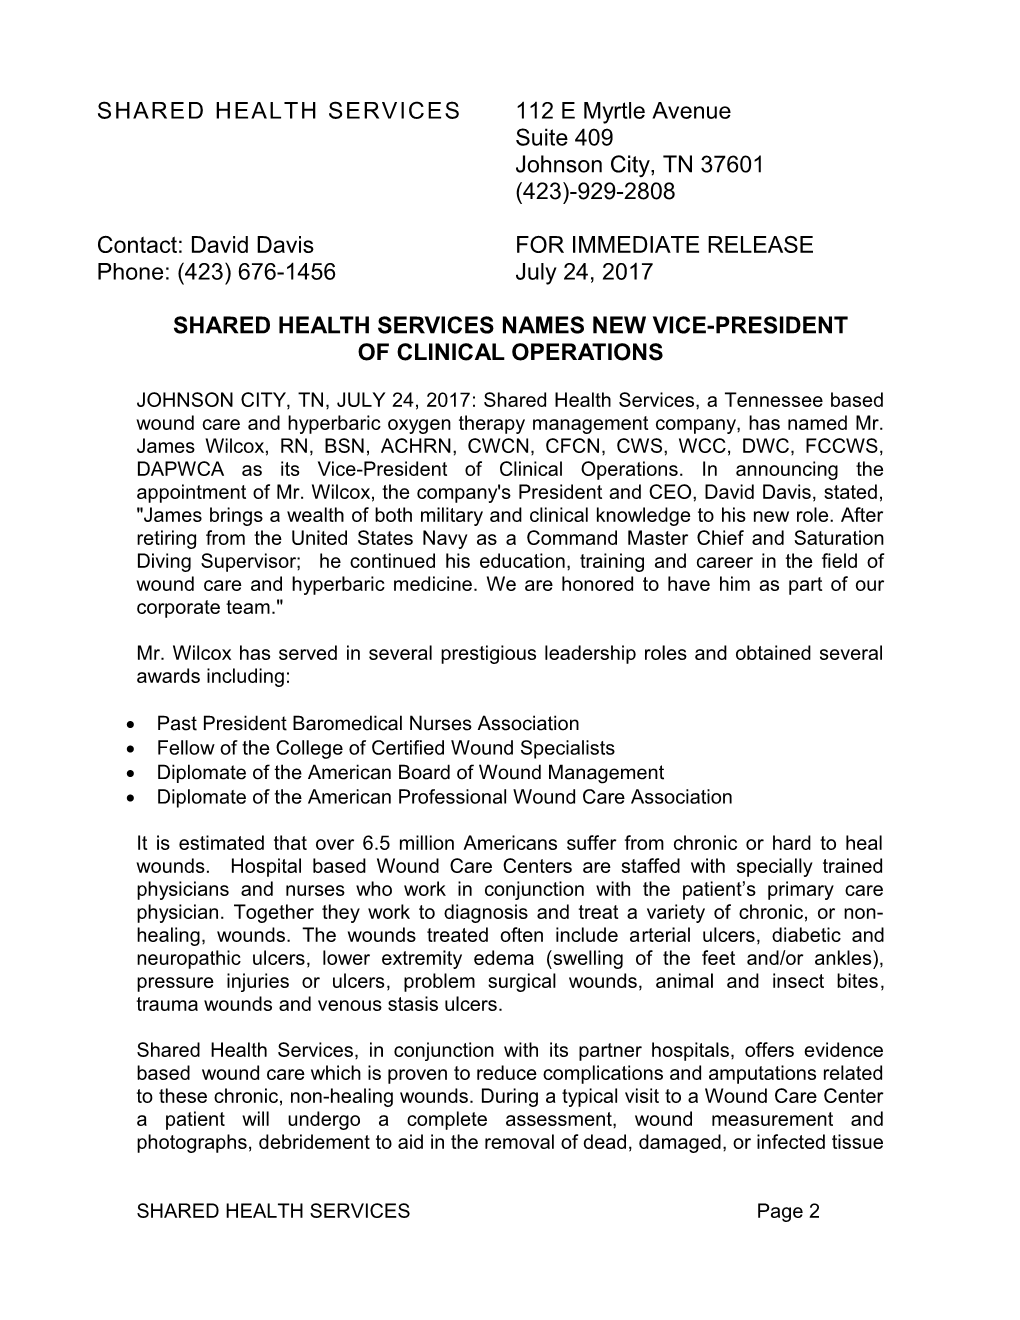 Shared Health Services Names New Vice-PRESIDENT of CLINICAL OPERATIONS